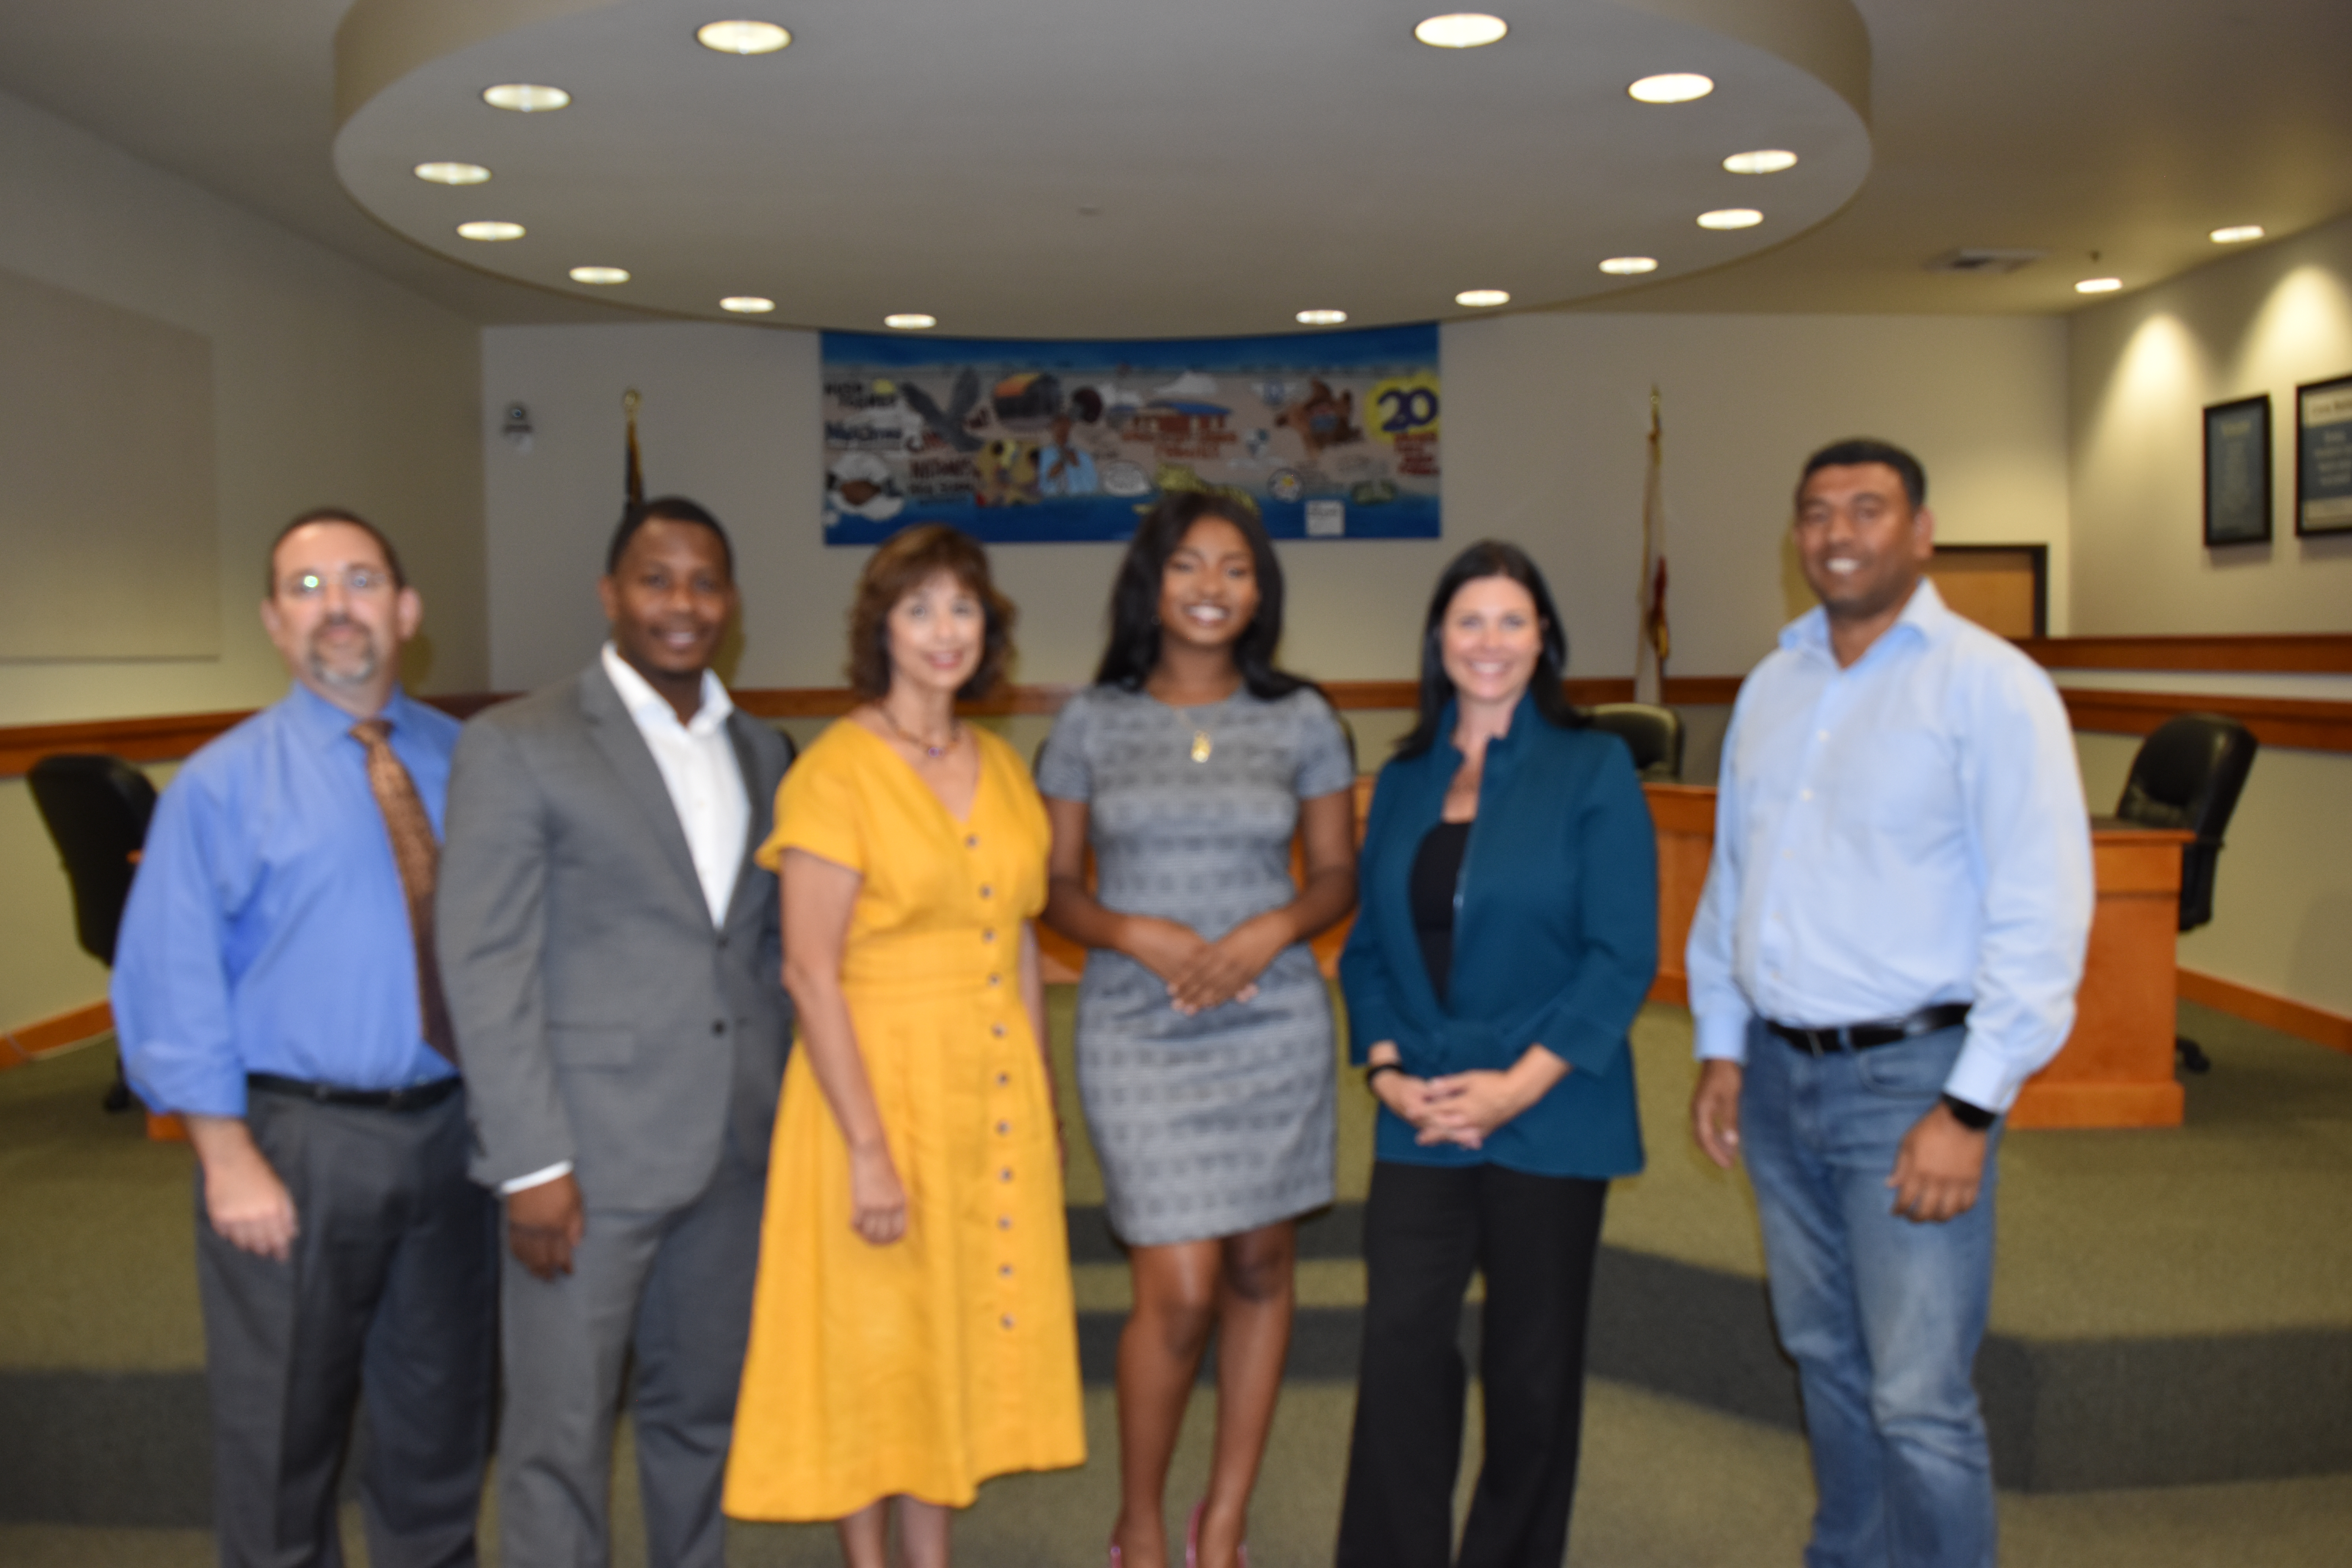 Student board member Valerie Smalls with NUSD Board Members